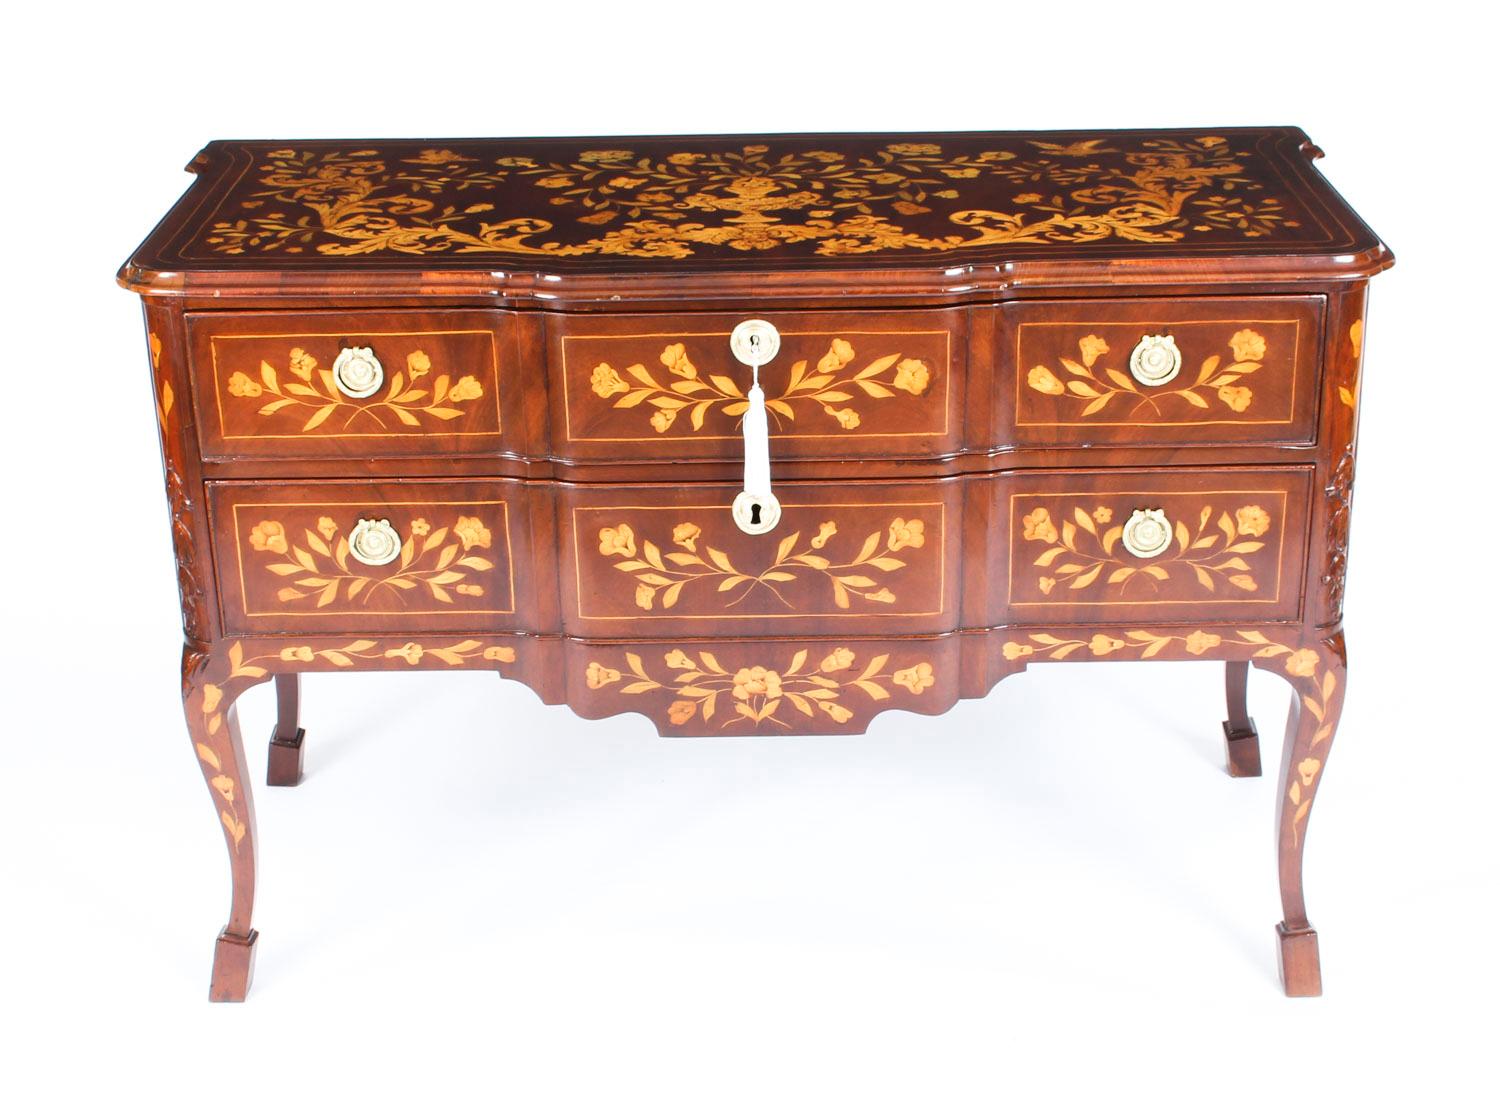 This is a superb antique early 19th century Dutch floral marquetry block front chest of drawers, circa 1820 in date.
 
This splendid chest has been accomplished in striking figured mahogany and expertly bordered with sycamore lines. The top with a